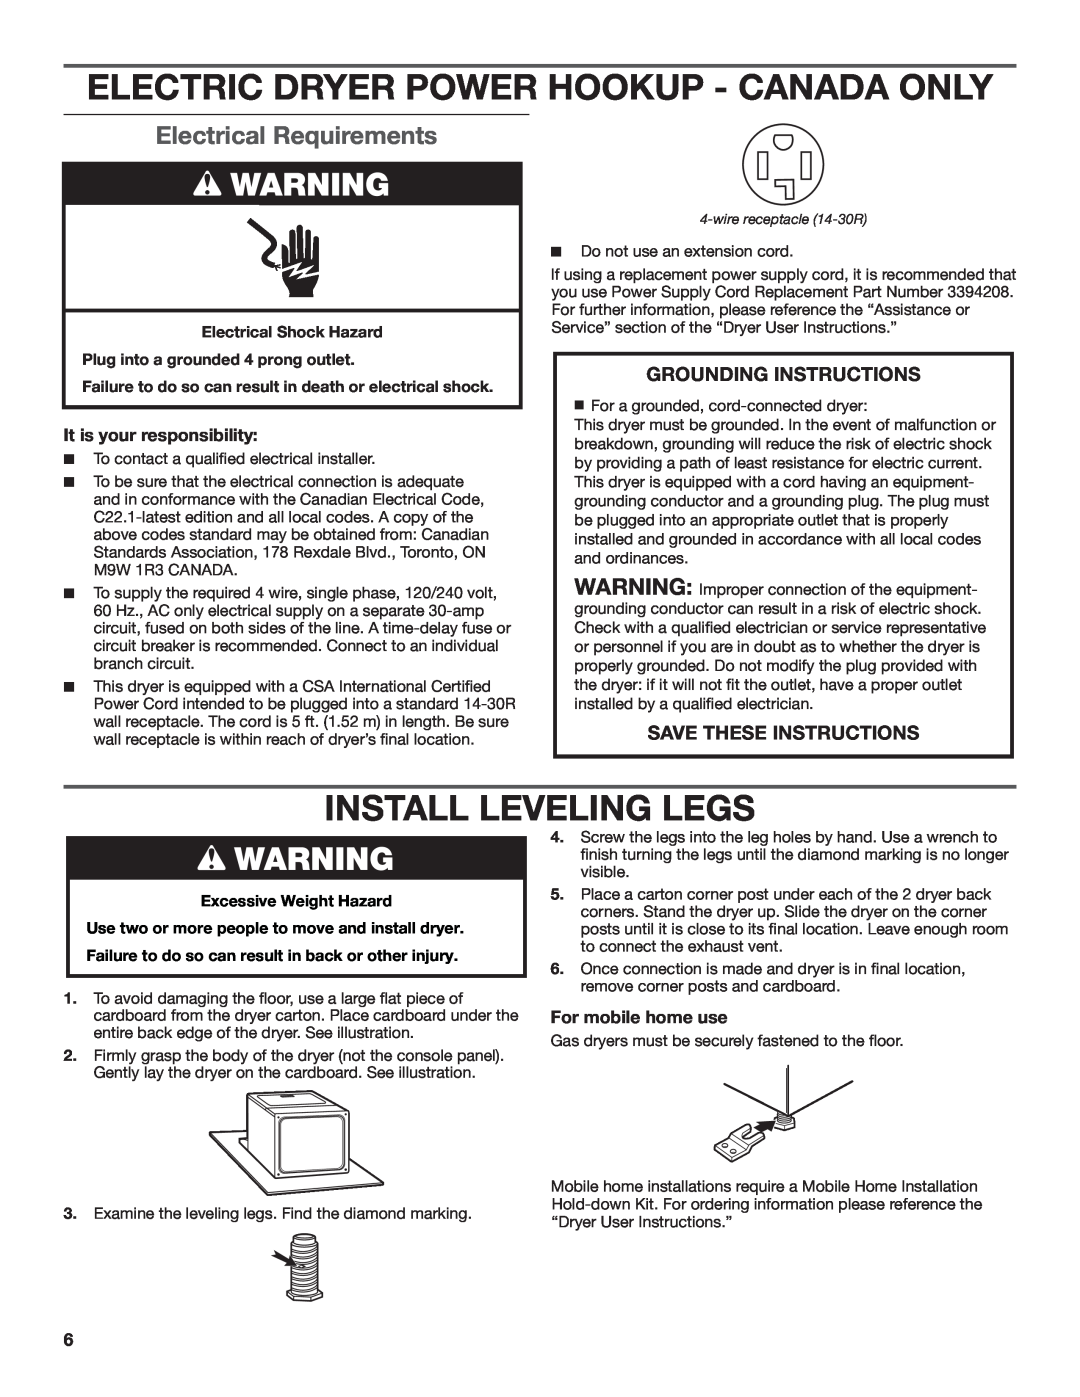 Maytag W10296136A-SP, W10296135A Electric Dryer Power Hookup - Canada Only, Install Leveling Legs, Electrical Requirements 